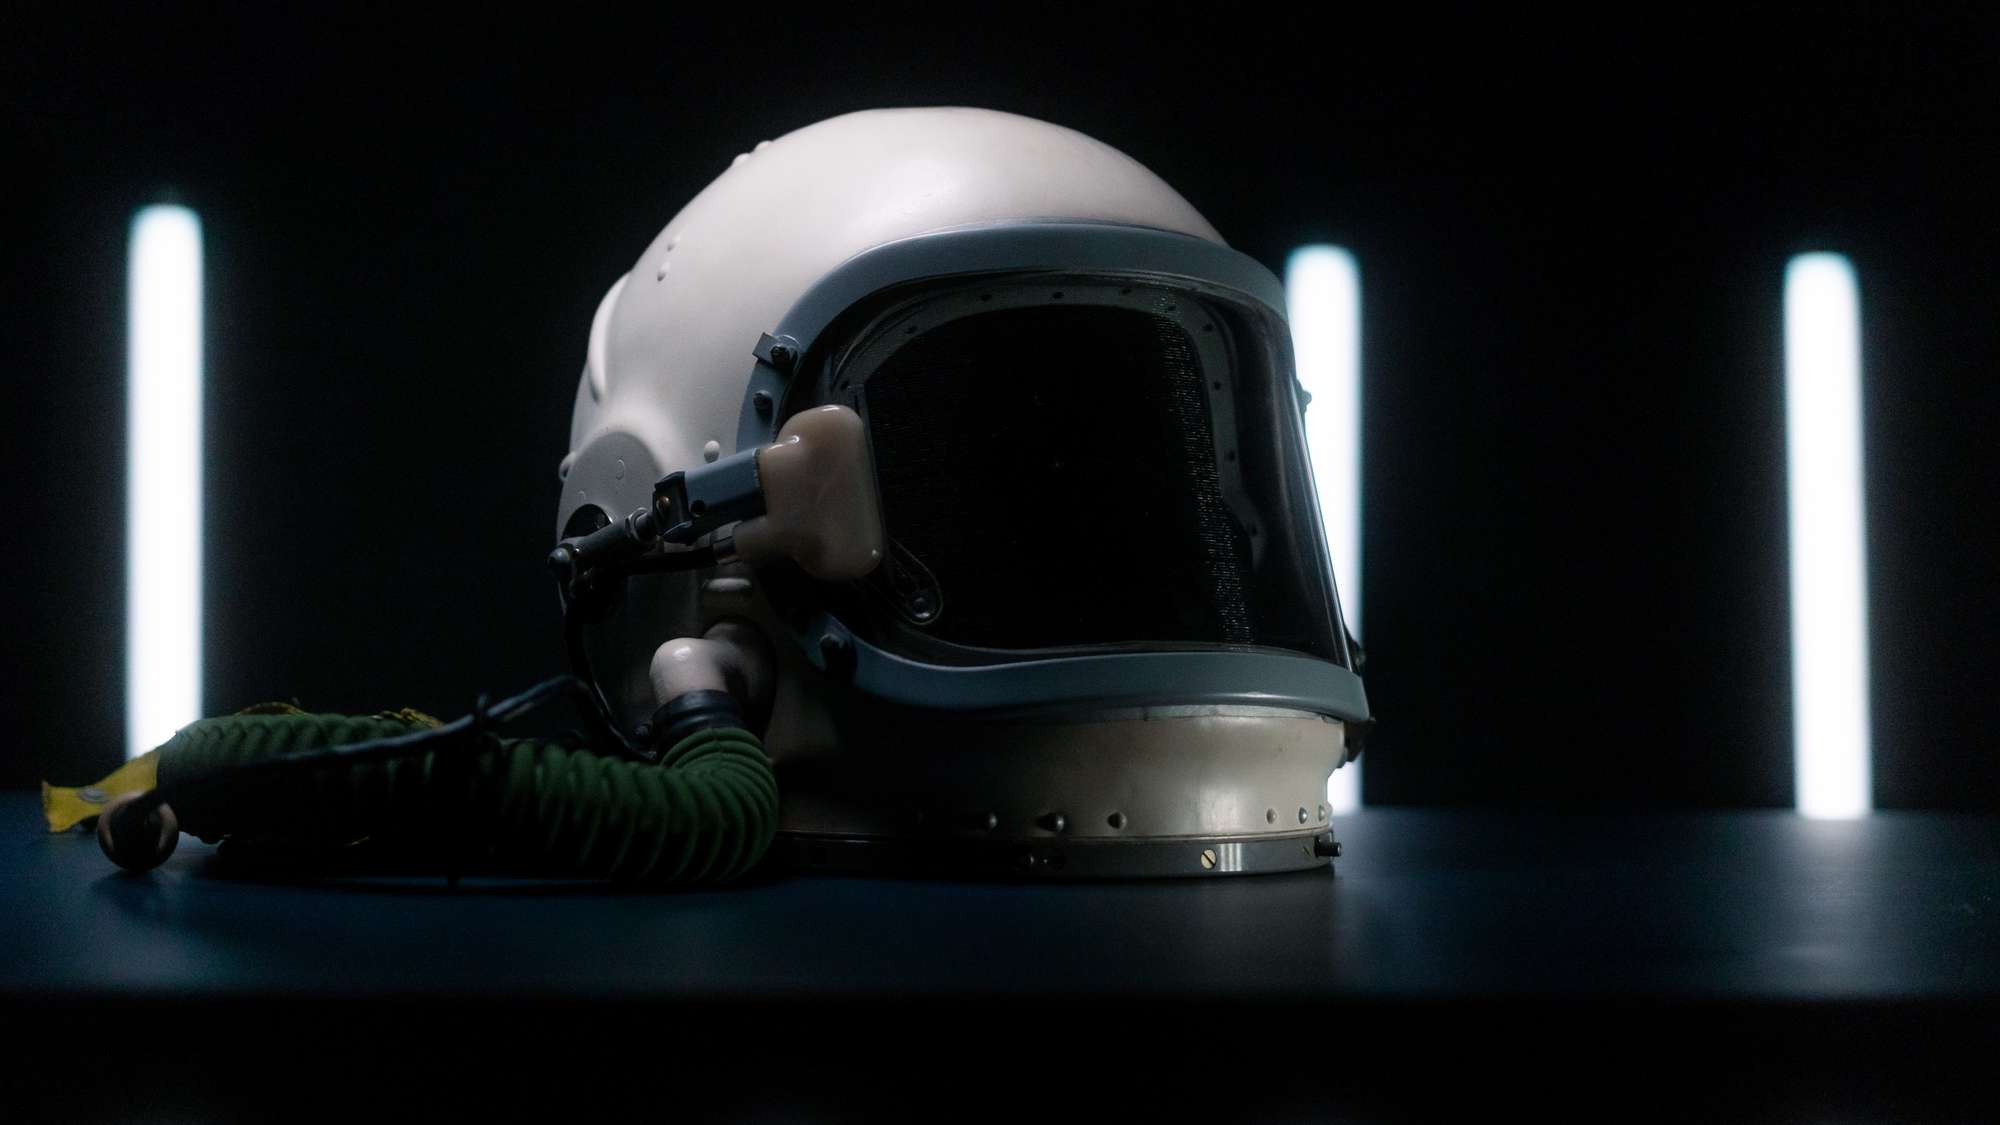 Space helmet with white lights in the background